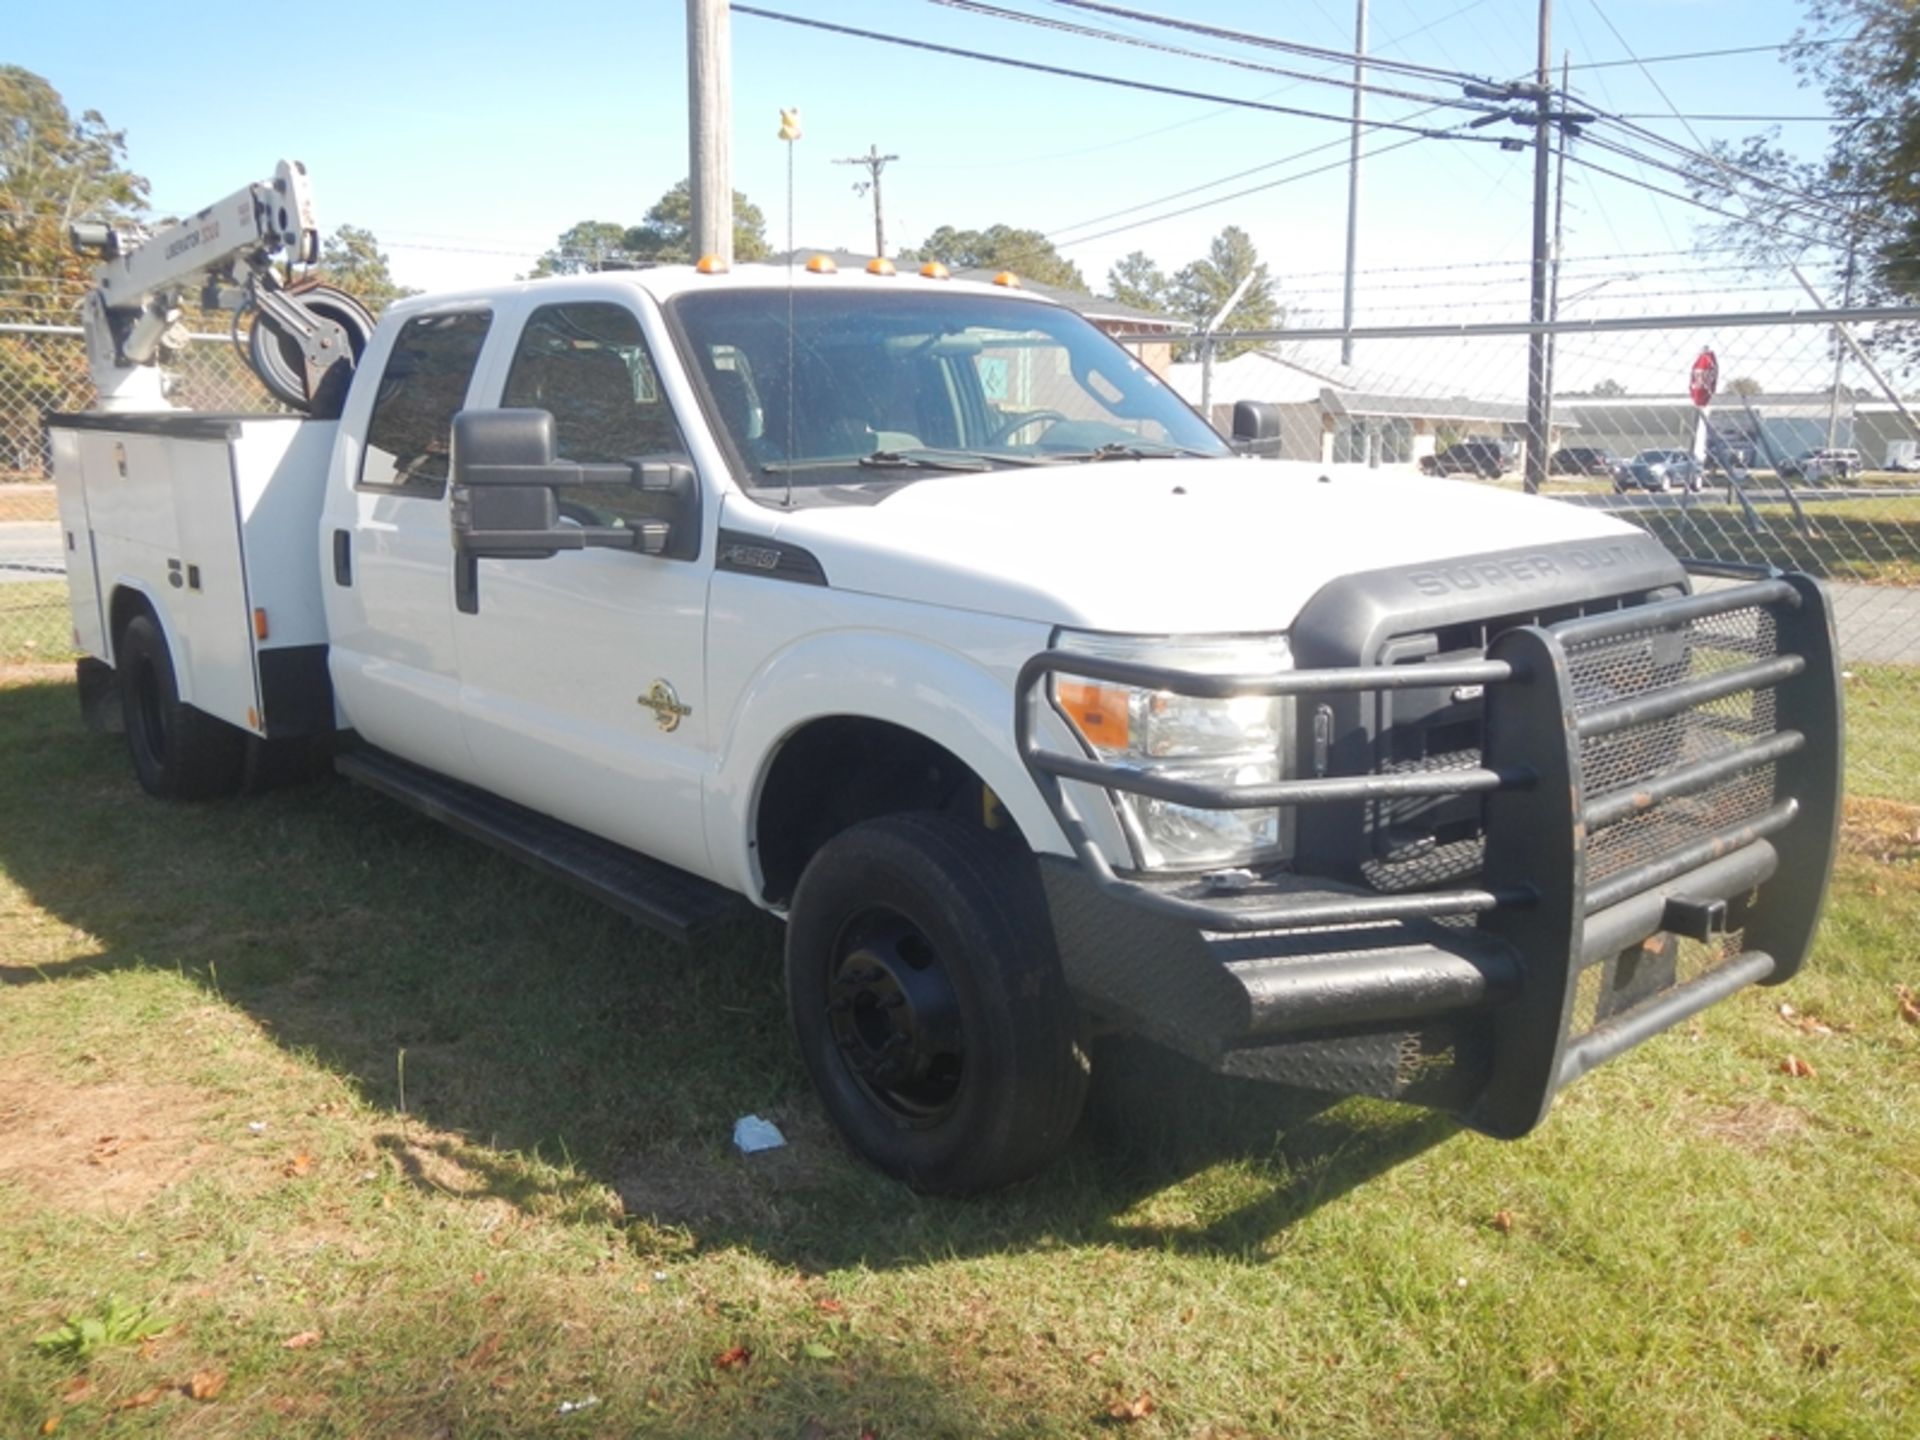 2012 FORD F-350 6.7L dsl, crew cab, 4wd, utility body with crane and air compressor - 314,136 - Image 2 of 9